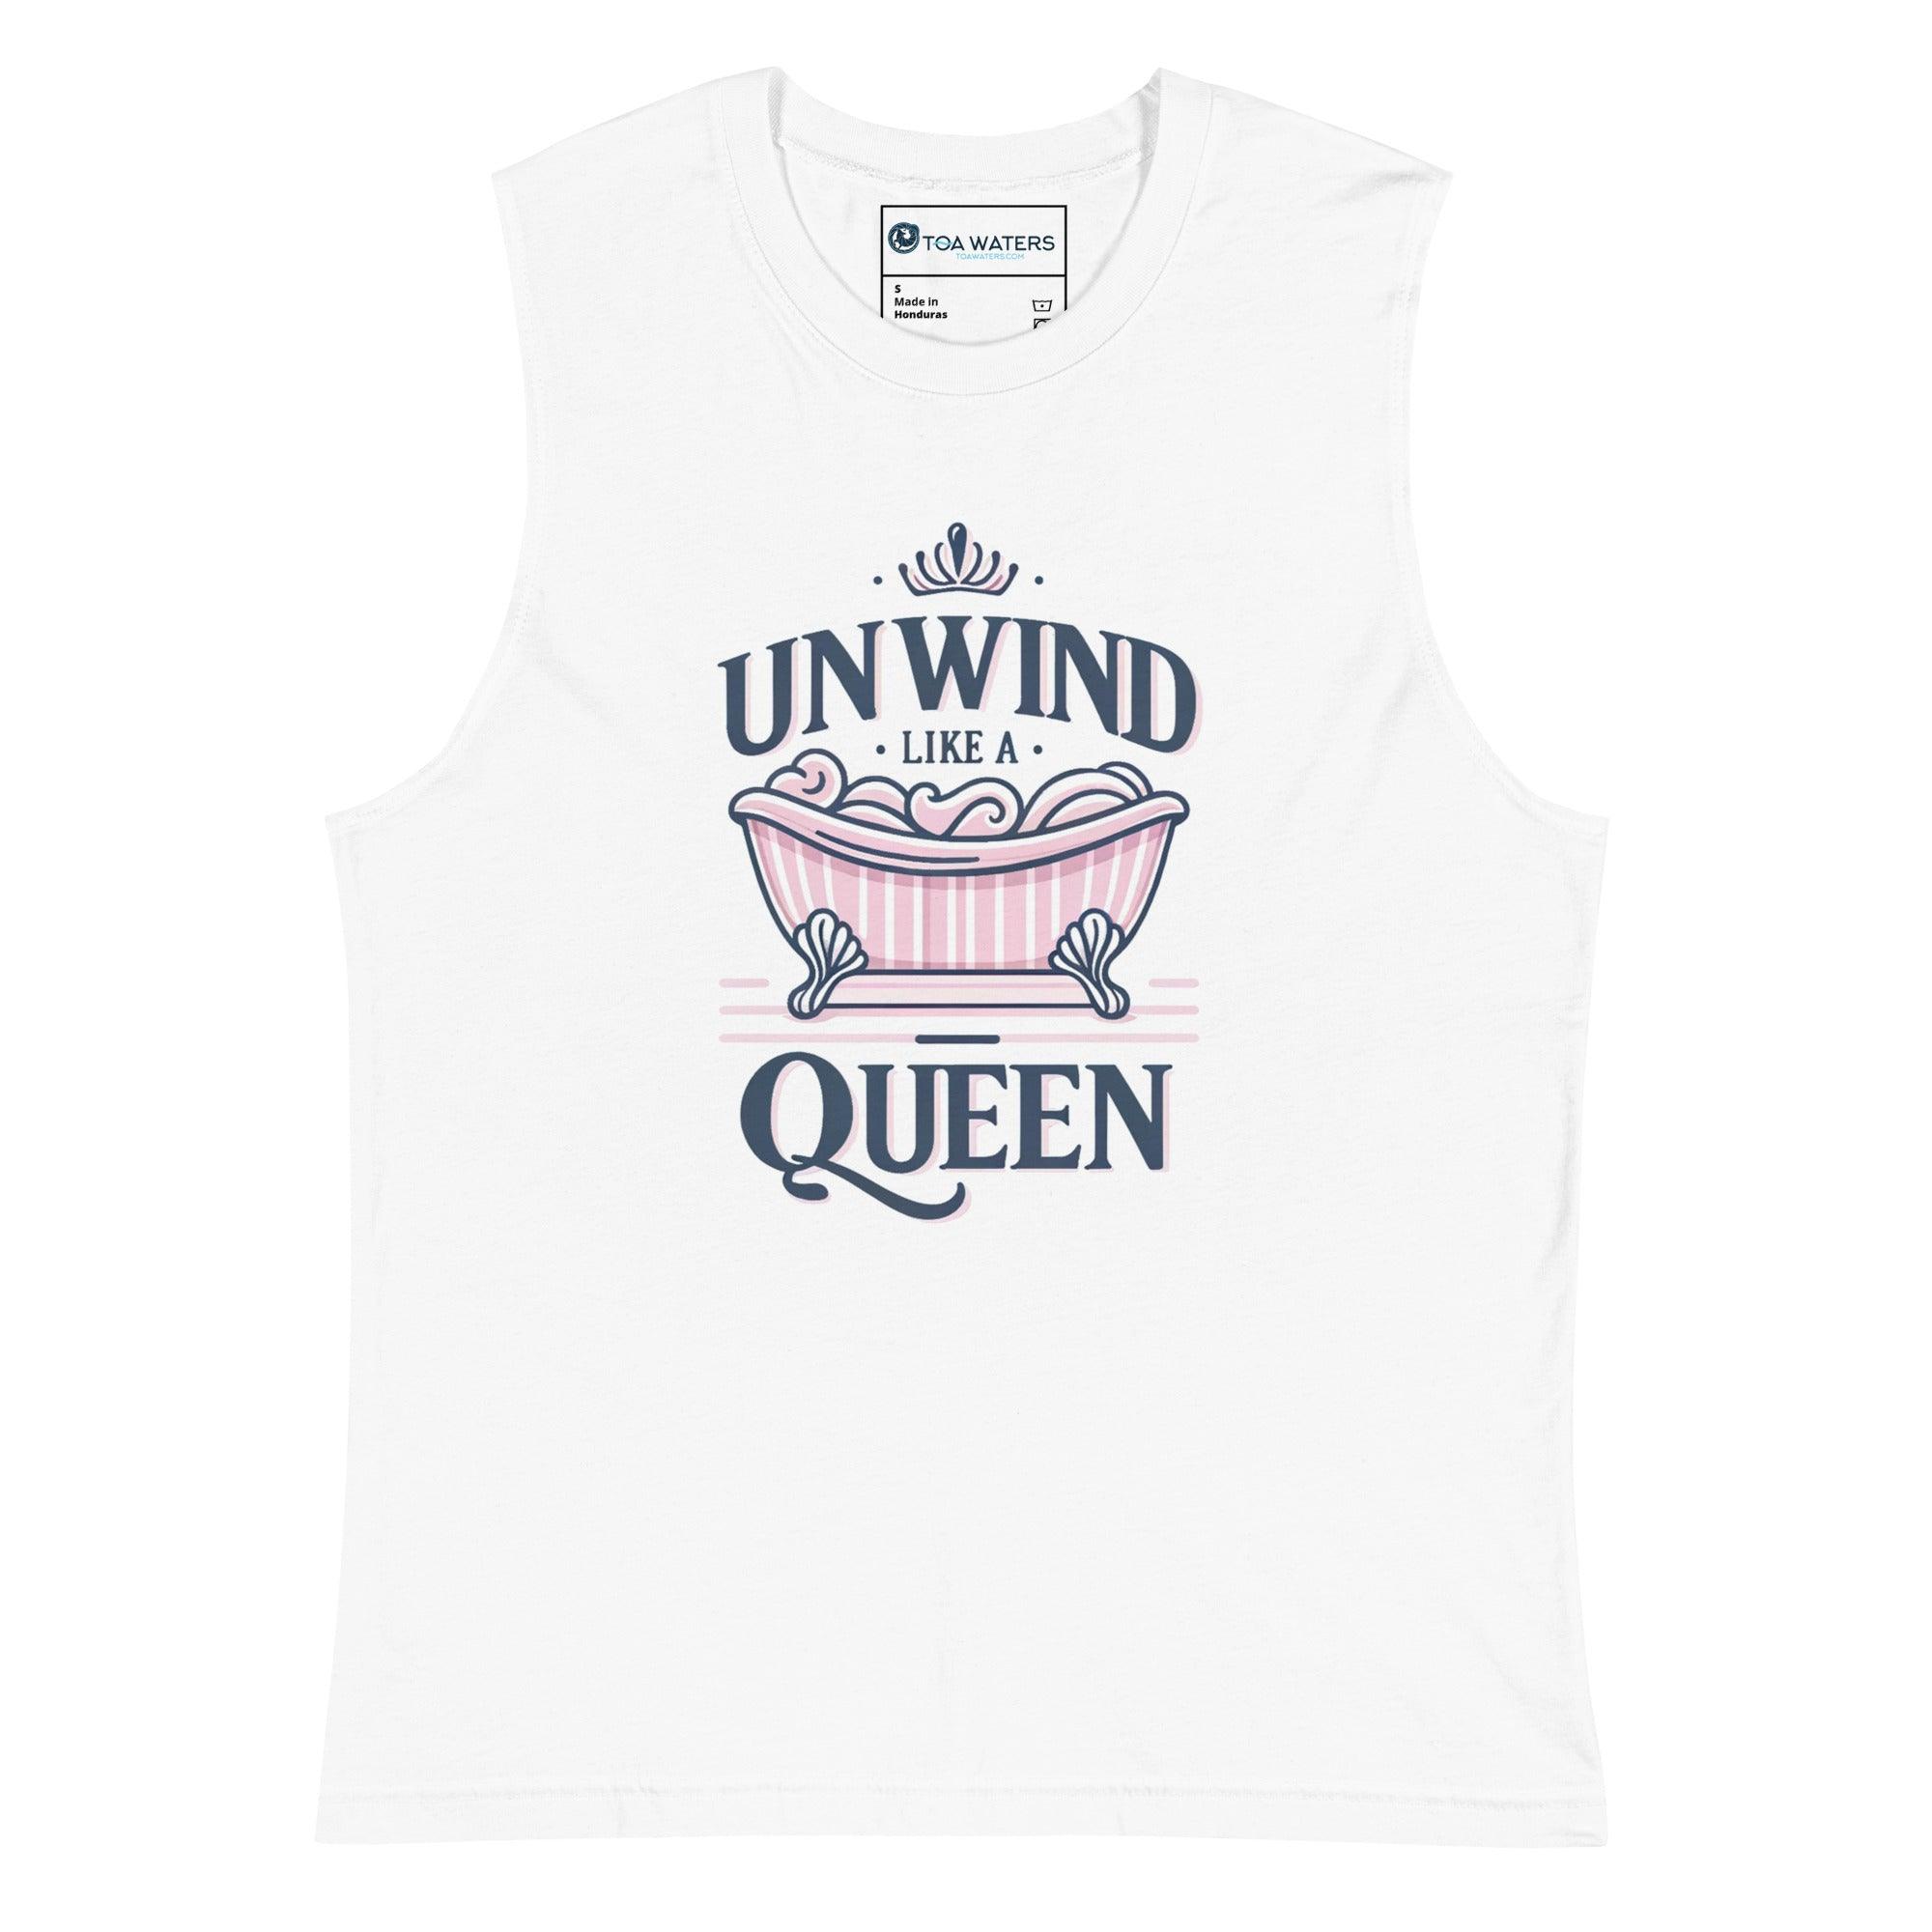 Unwind like a Queen Muscle Shirt - TOA Waters